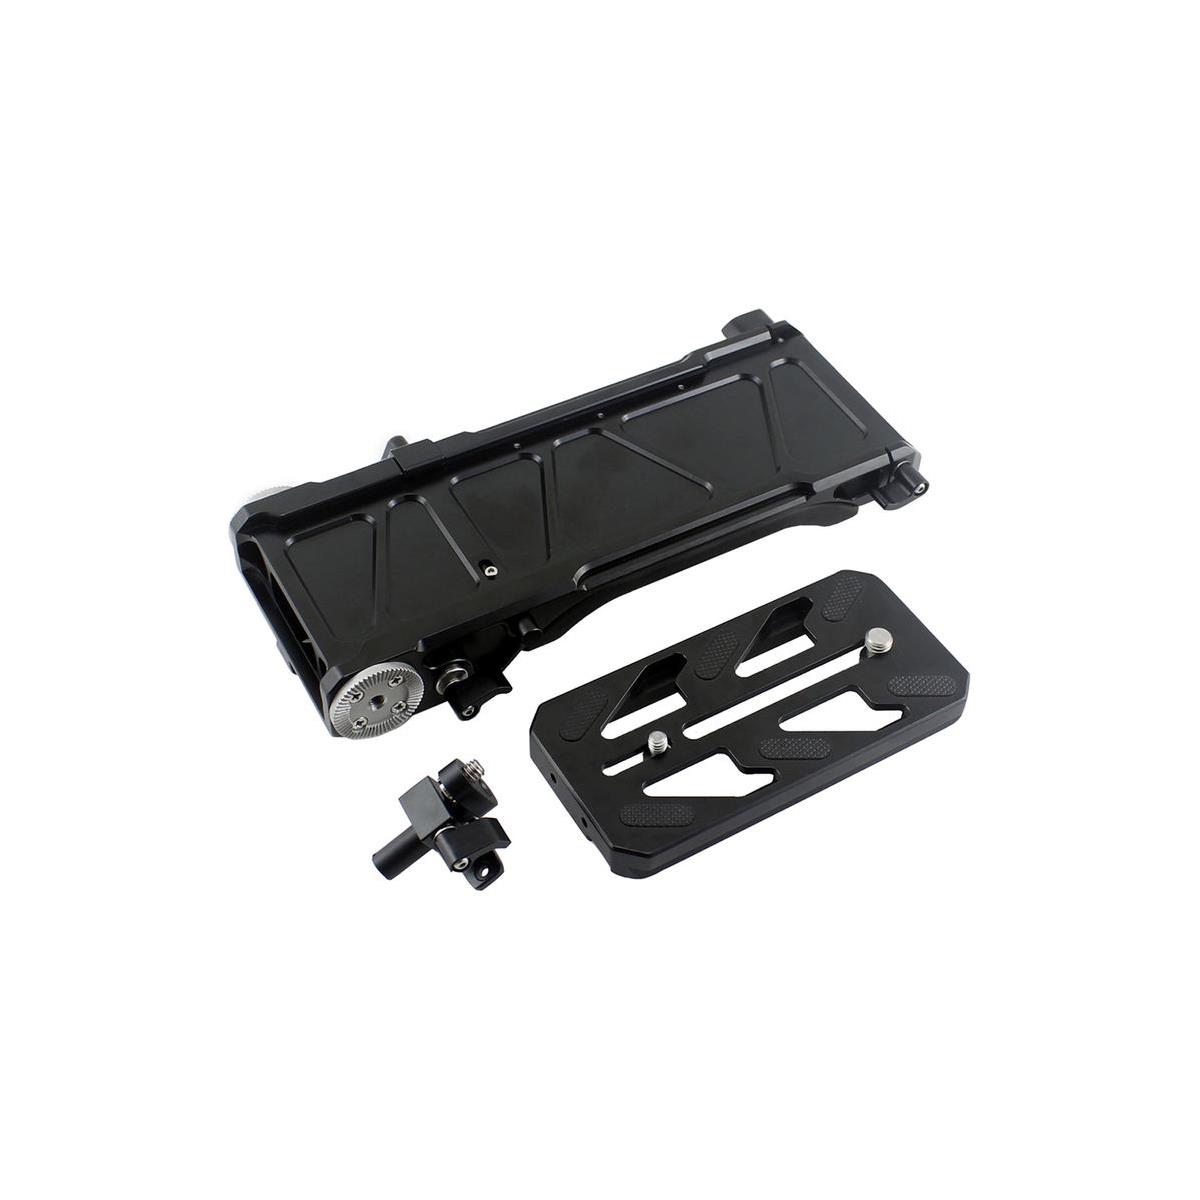 Came-TV Base and Adapter Plate for Panasonic, Sony, Canon and Blackmagic Cameras -  EVA1-VCT